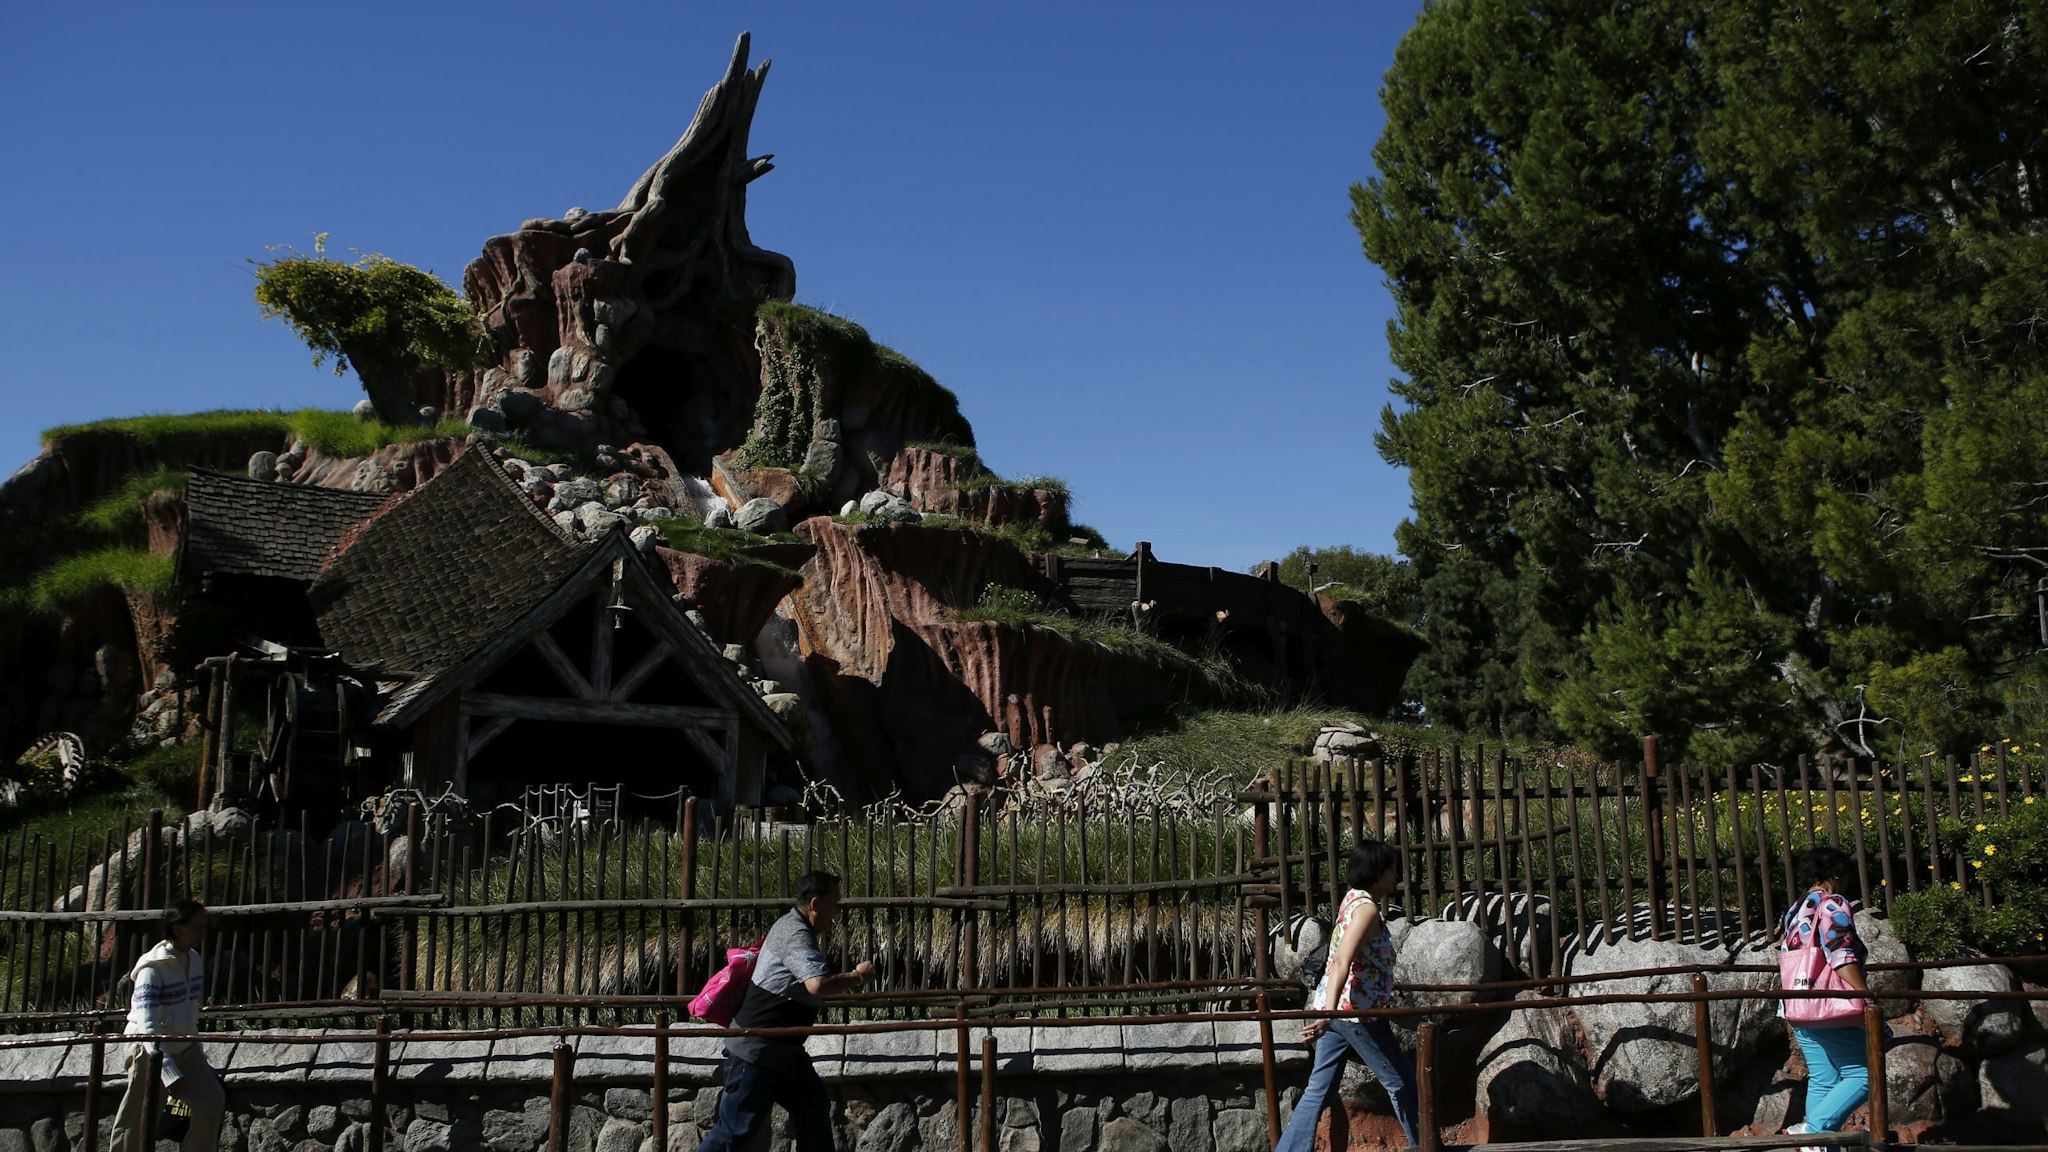 Guests walk in line to Splash Mountain at Walt Disney Co.'s Disneyland Park, part of the Disneyland Resort, in Anaheim, California, U.S., on Wednesday, Nov. 6, 2013. The Walt Disney Co. is scheduled to release earnings figures on Nov. 7. Photographer: Patrick Fallon/Bloomberg via Getty Images